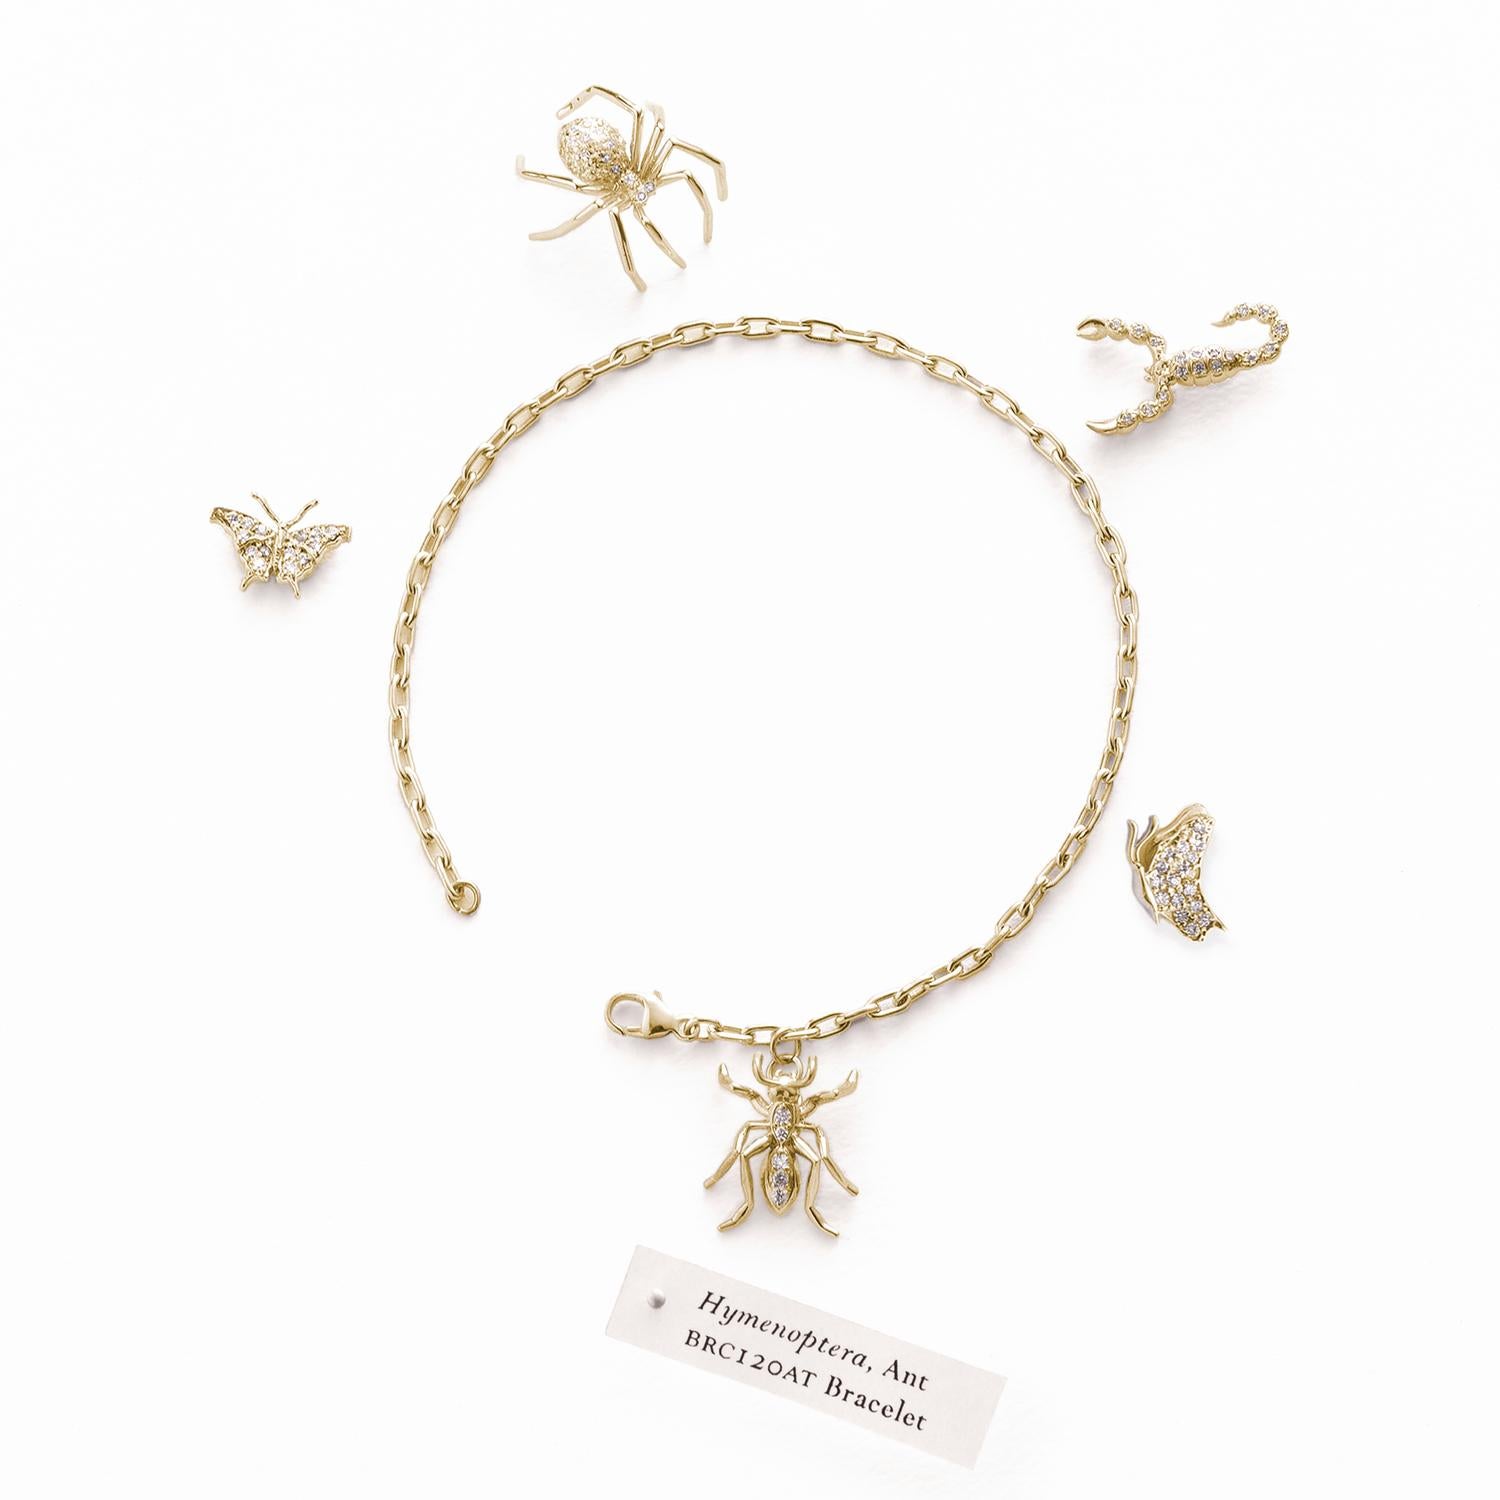 Introducing our exquisite Ant Charm Bracelet, a captivating piece that exudes elegance and charm. Crafted from 14k yellow gold, this limited edition bracelet is a true work of art, designed to make a lasting impression.

At its center, the bracelet